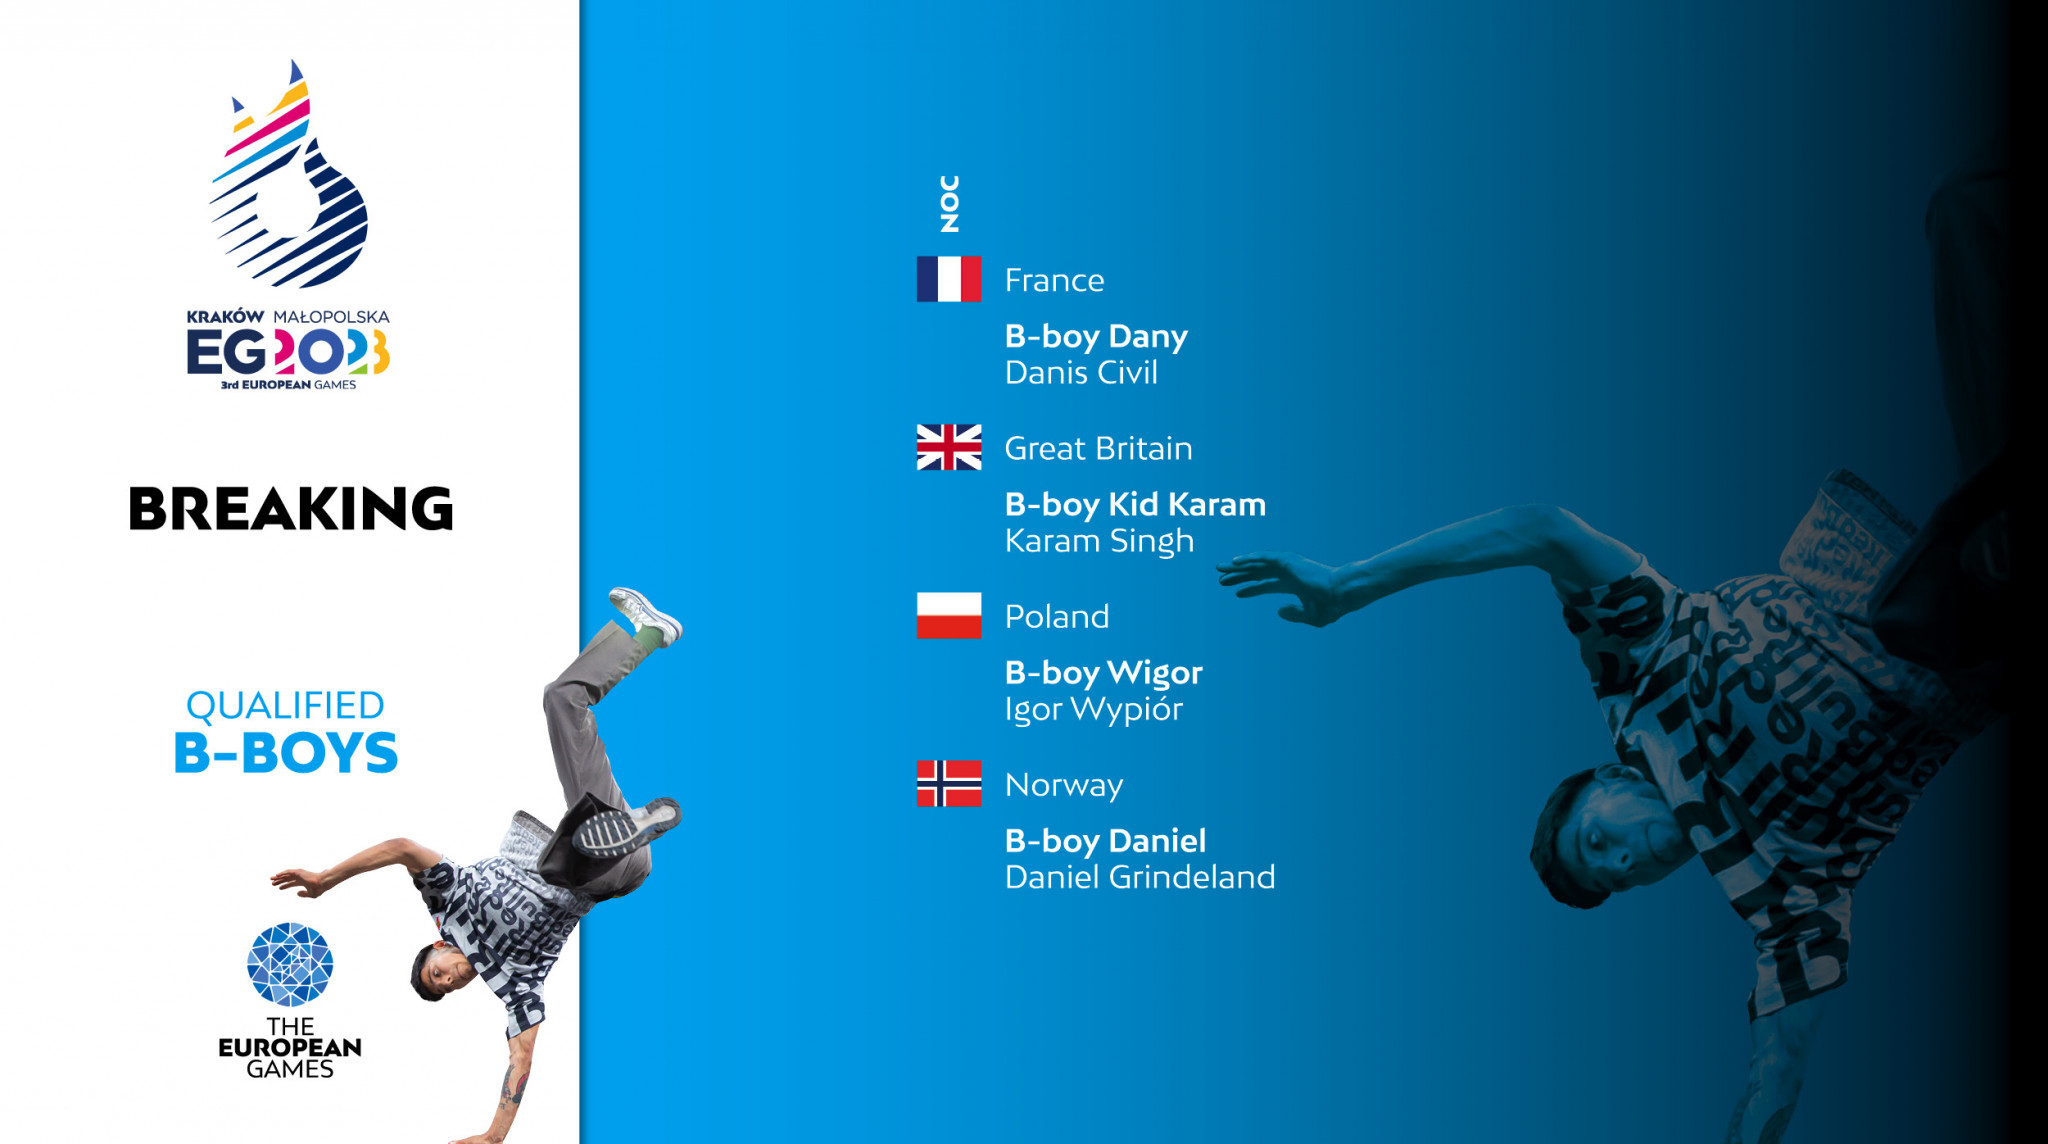 Four b-boys are assured of a place at the European Games ©Twitter/EOCMedia